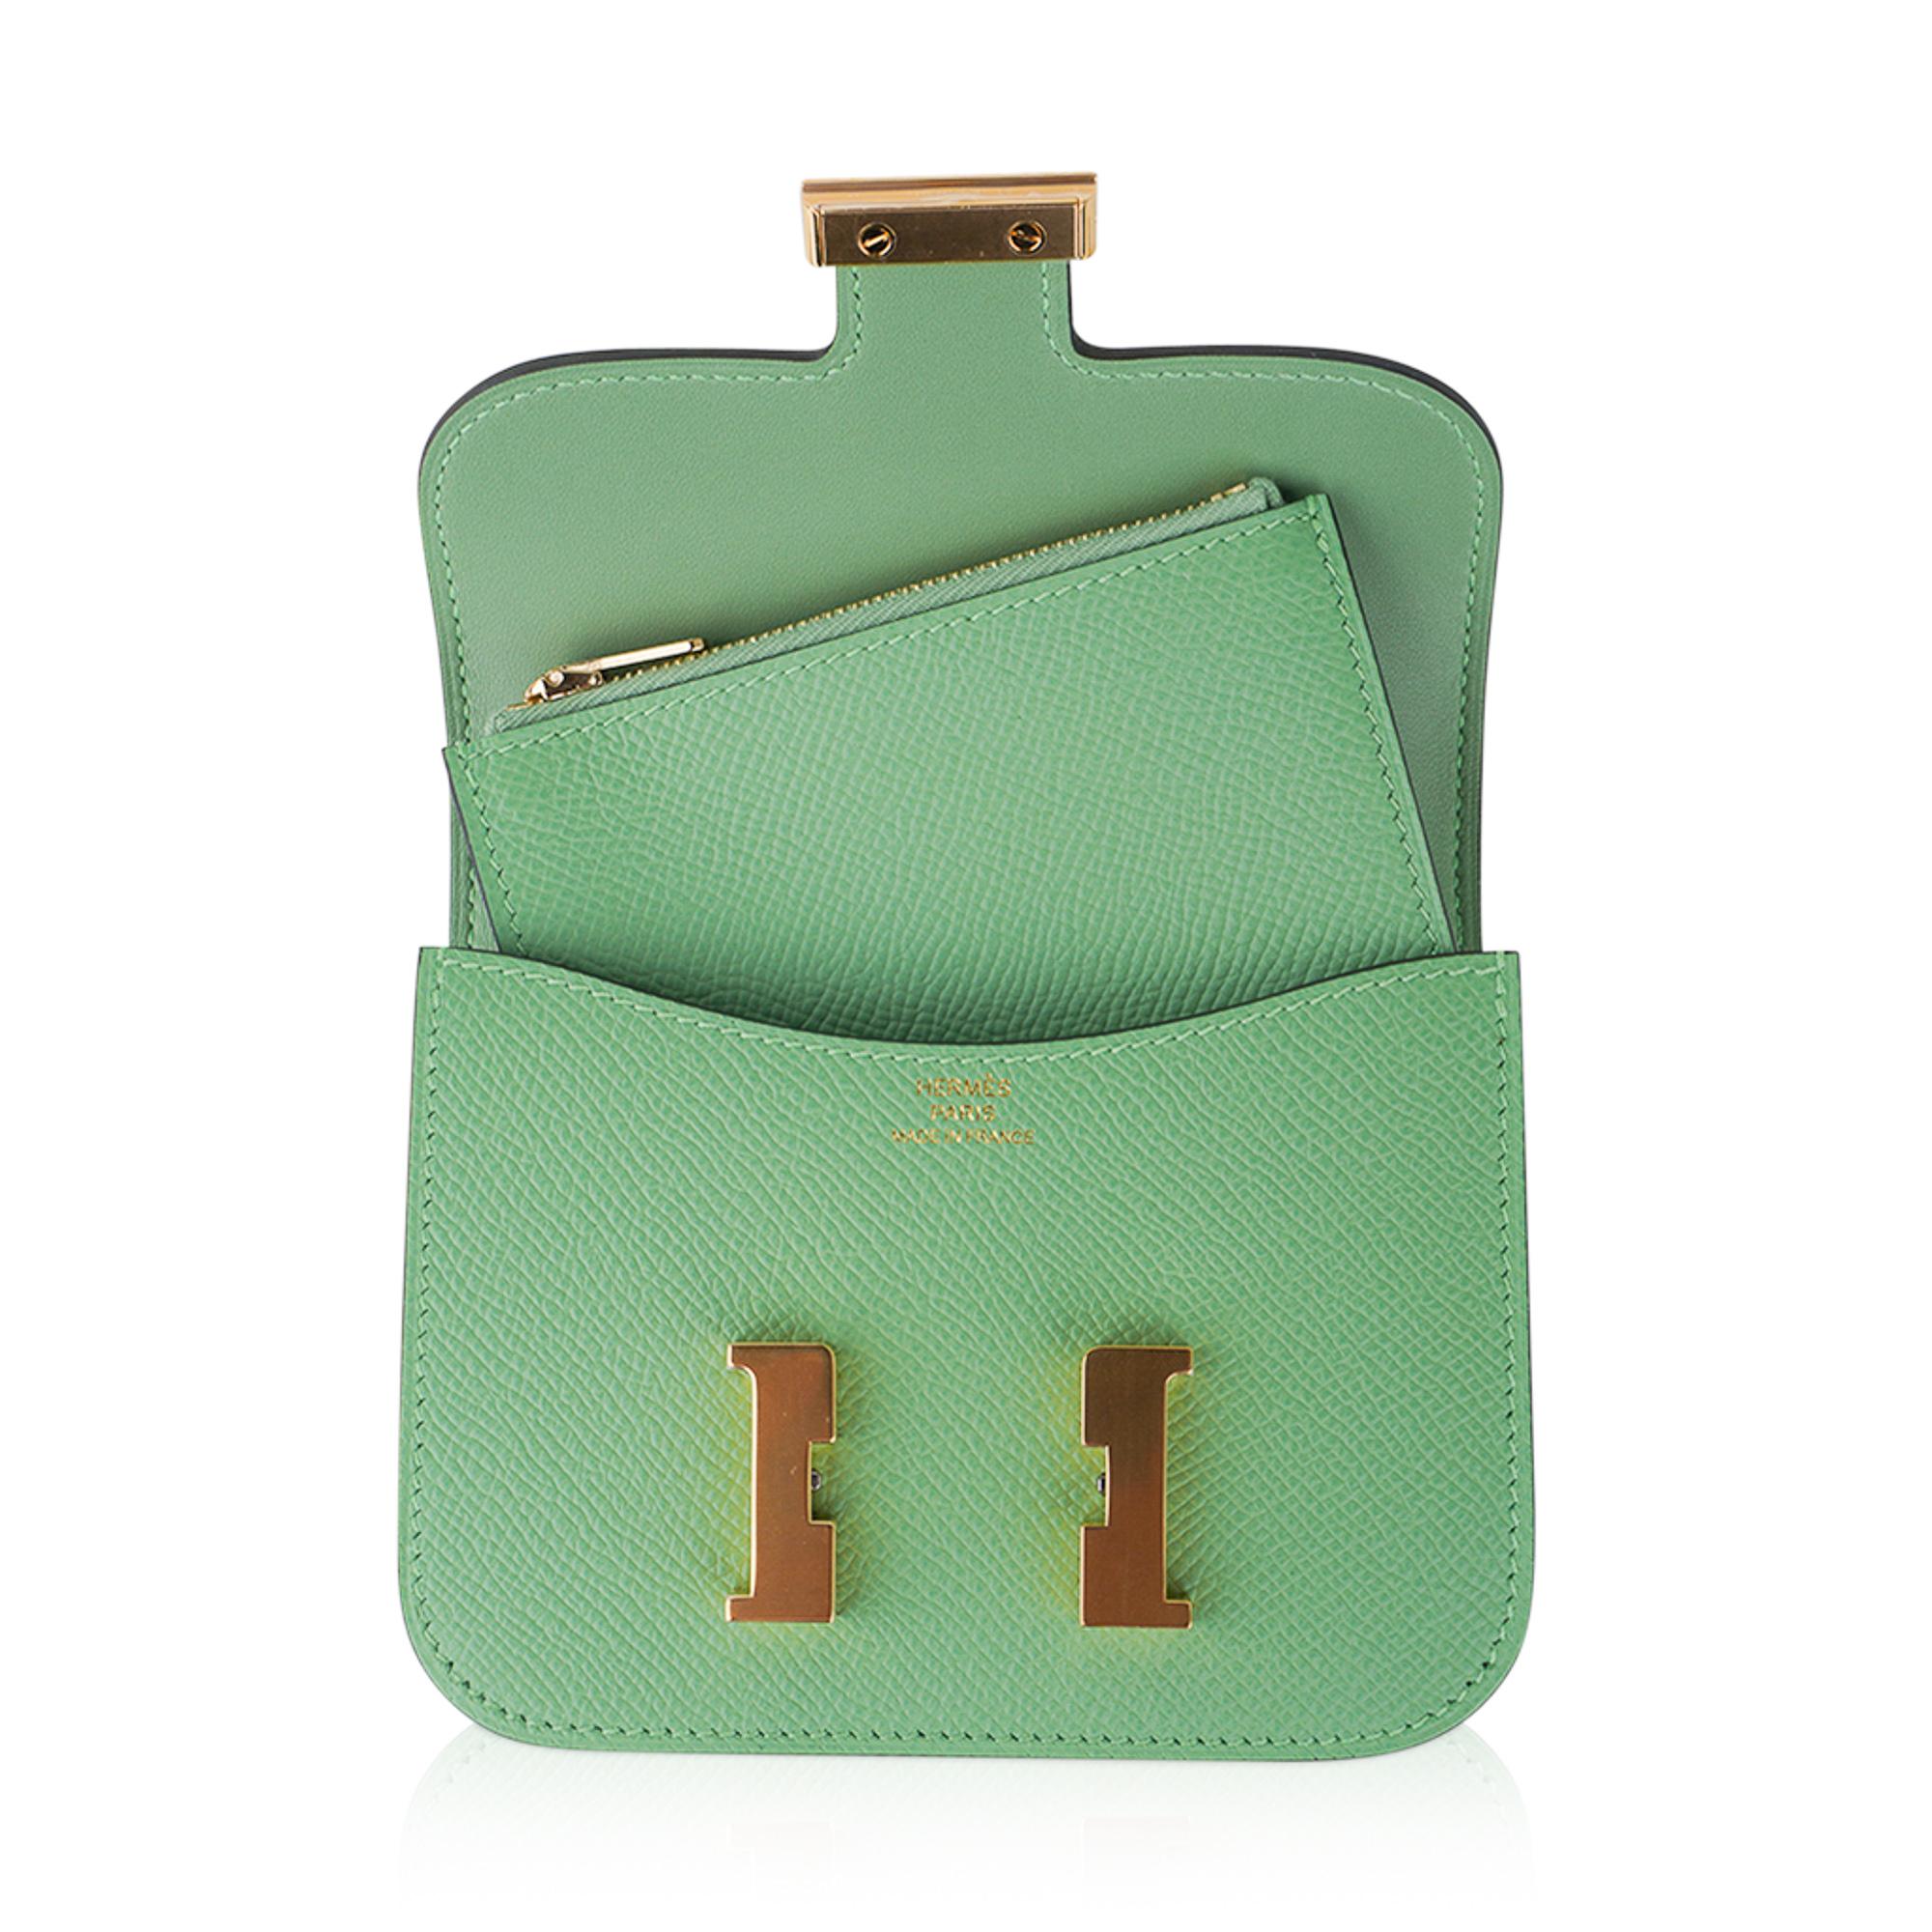 Mightychic offers an Hermes Constance Slim Wallet Belt bag featured in fresh Vert Criquet.
This Hermes wallet is stunning with coveted Gold hardware in epsom leather.
Includes removable zipped change purse and 2 credit card slots.
Rear belt loop